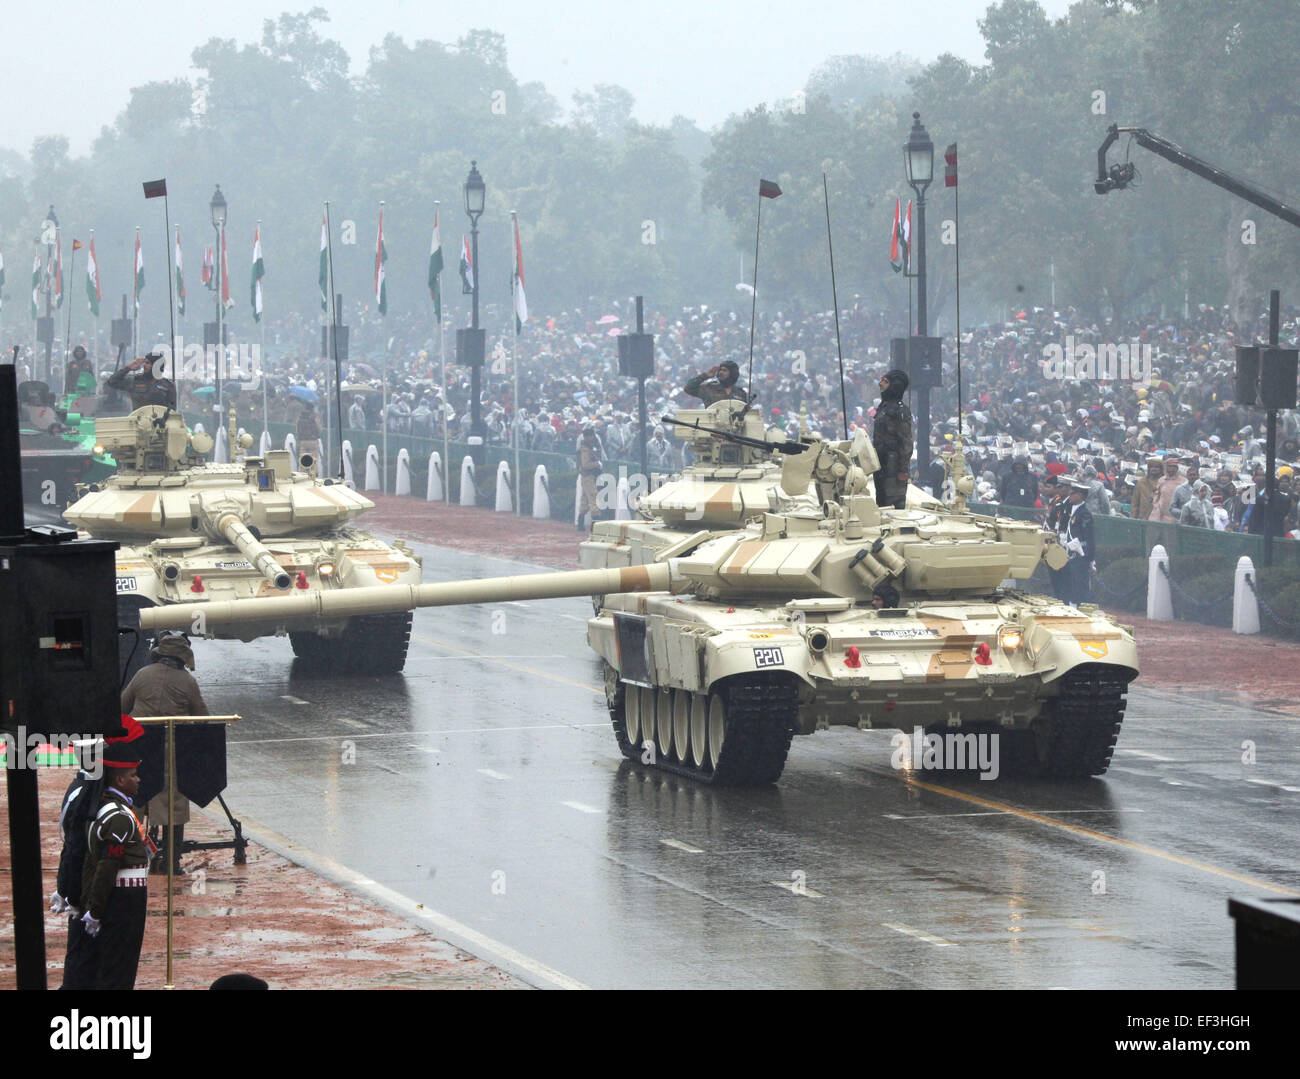 New Delhi, India. 26th Jan, 2015. Army tanks move on the historic Rajpath during the 66th Republic Day parade in New Delhi, India, Jan. 26, 2015. Republic Day marks the anniversary of India's democratic constitution taking force in 1950. © Partha Sarkar/Xinhua/Alamy Live News Stock Photo